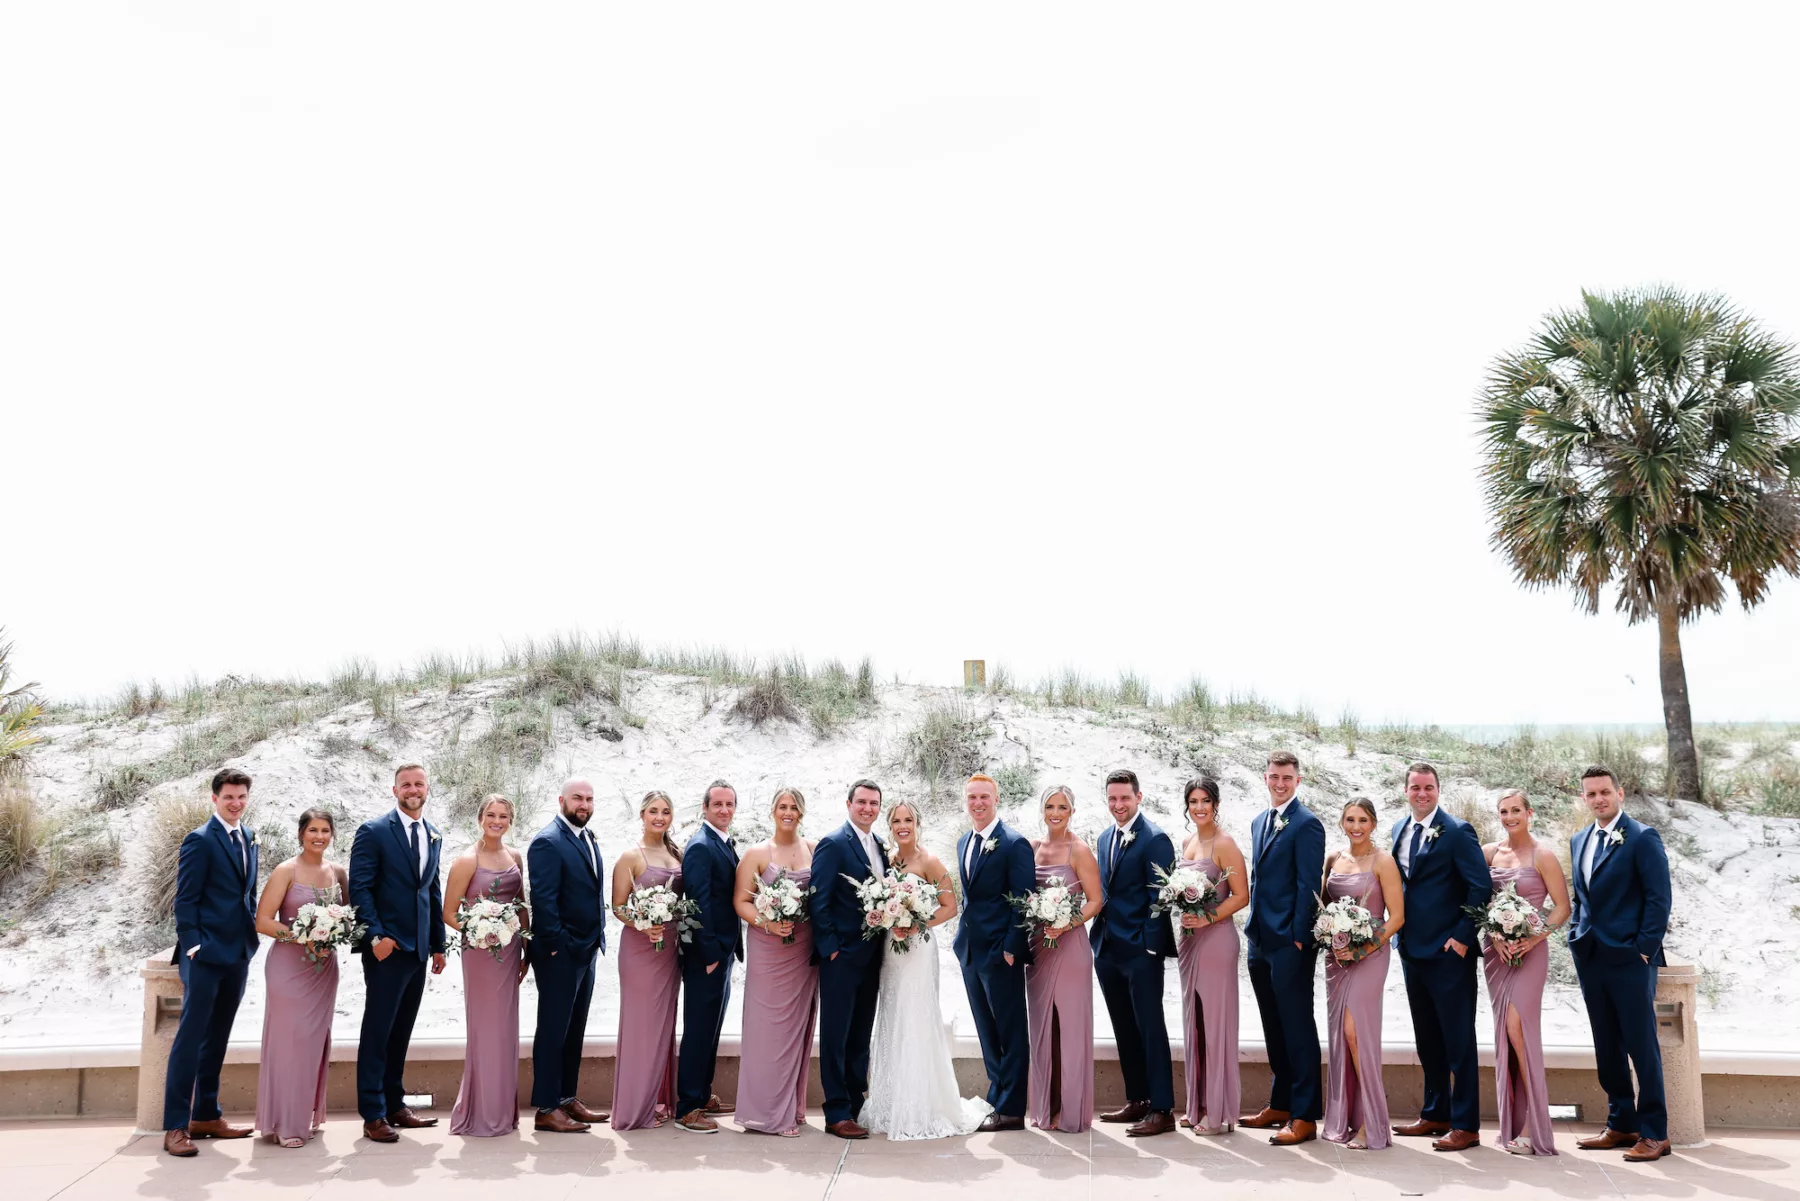 Mauve Matching Bridesmaids Dresses and Navy Groomsmen Suits Clearwater Beach Wedding Day Attire Ideas